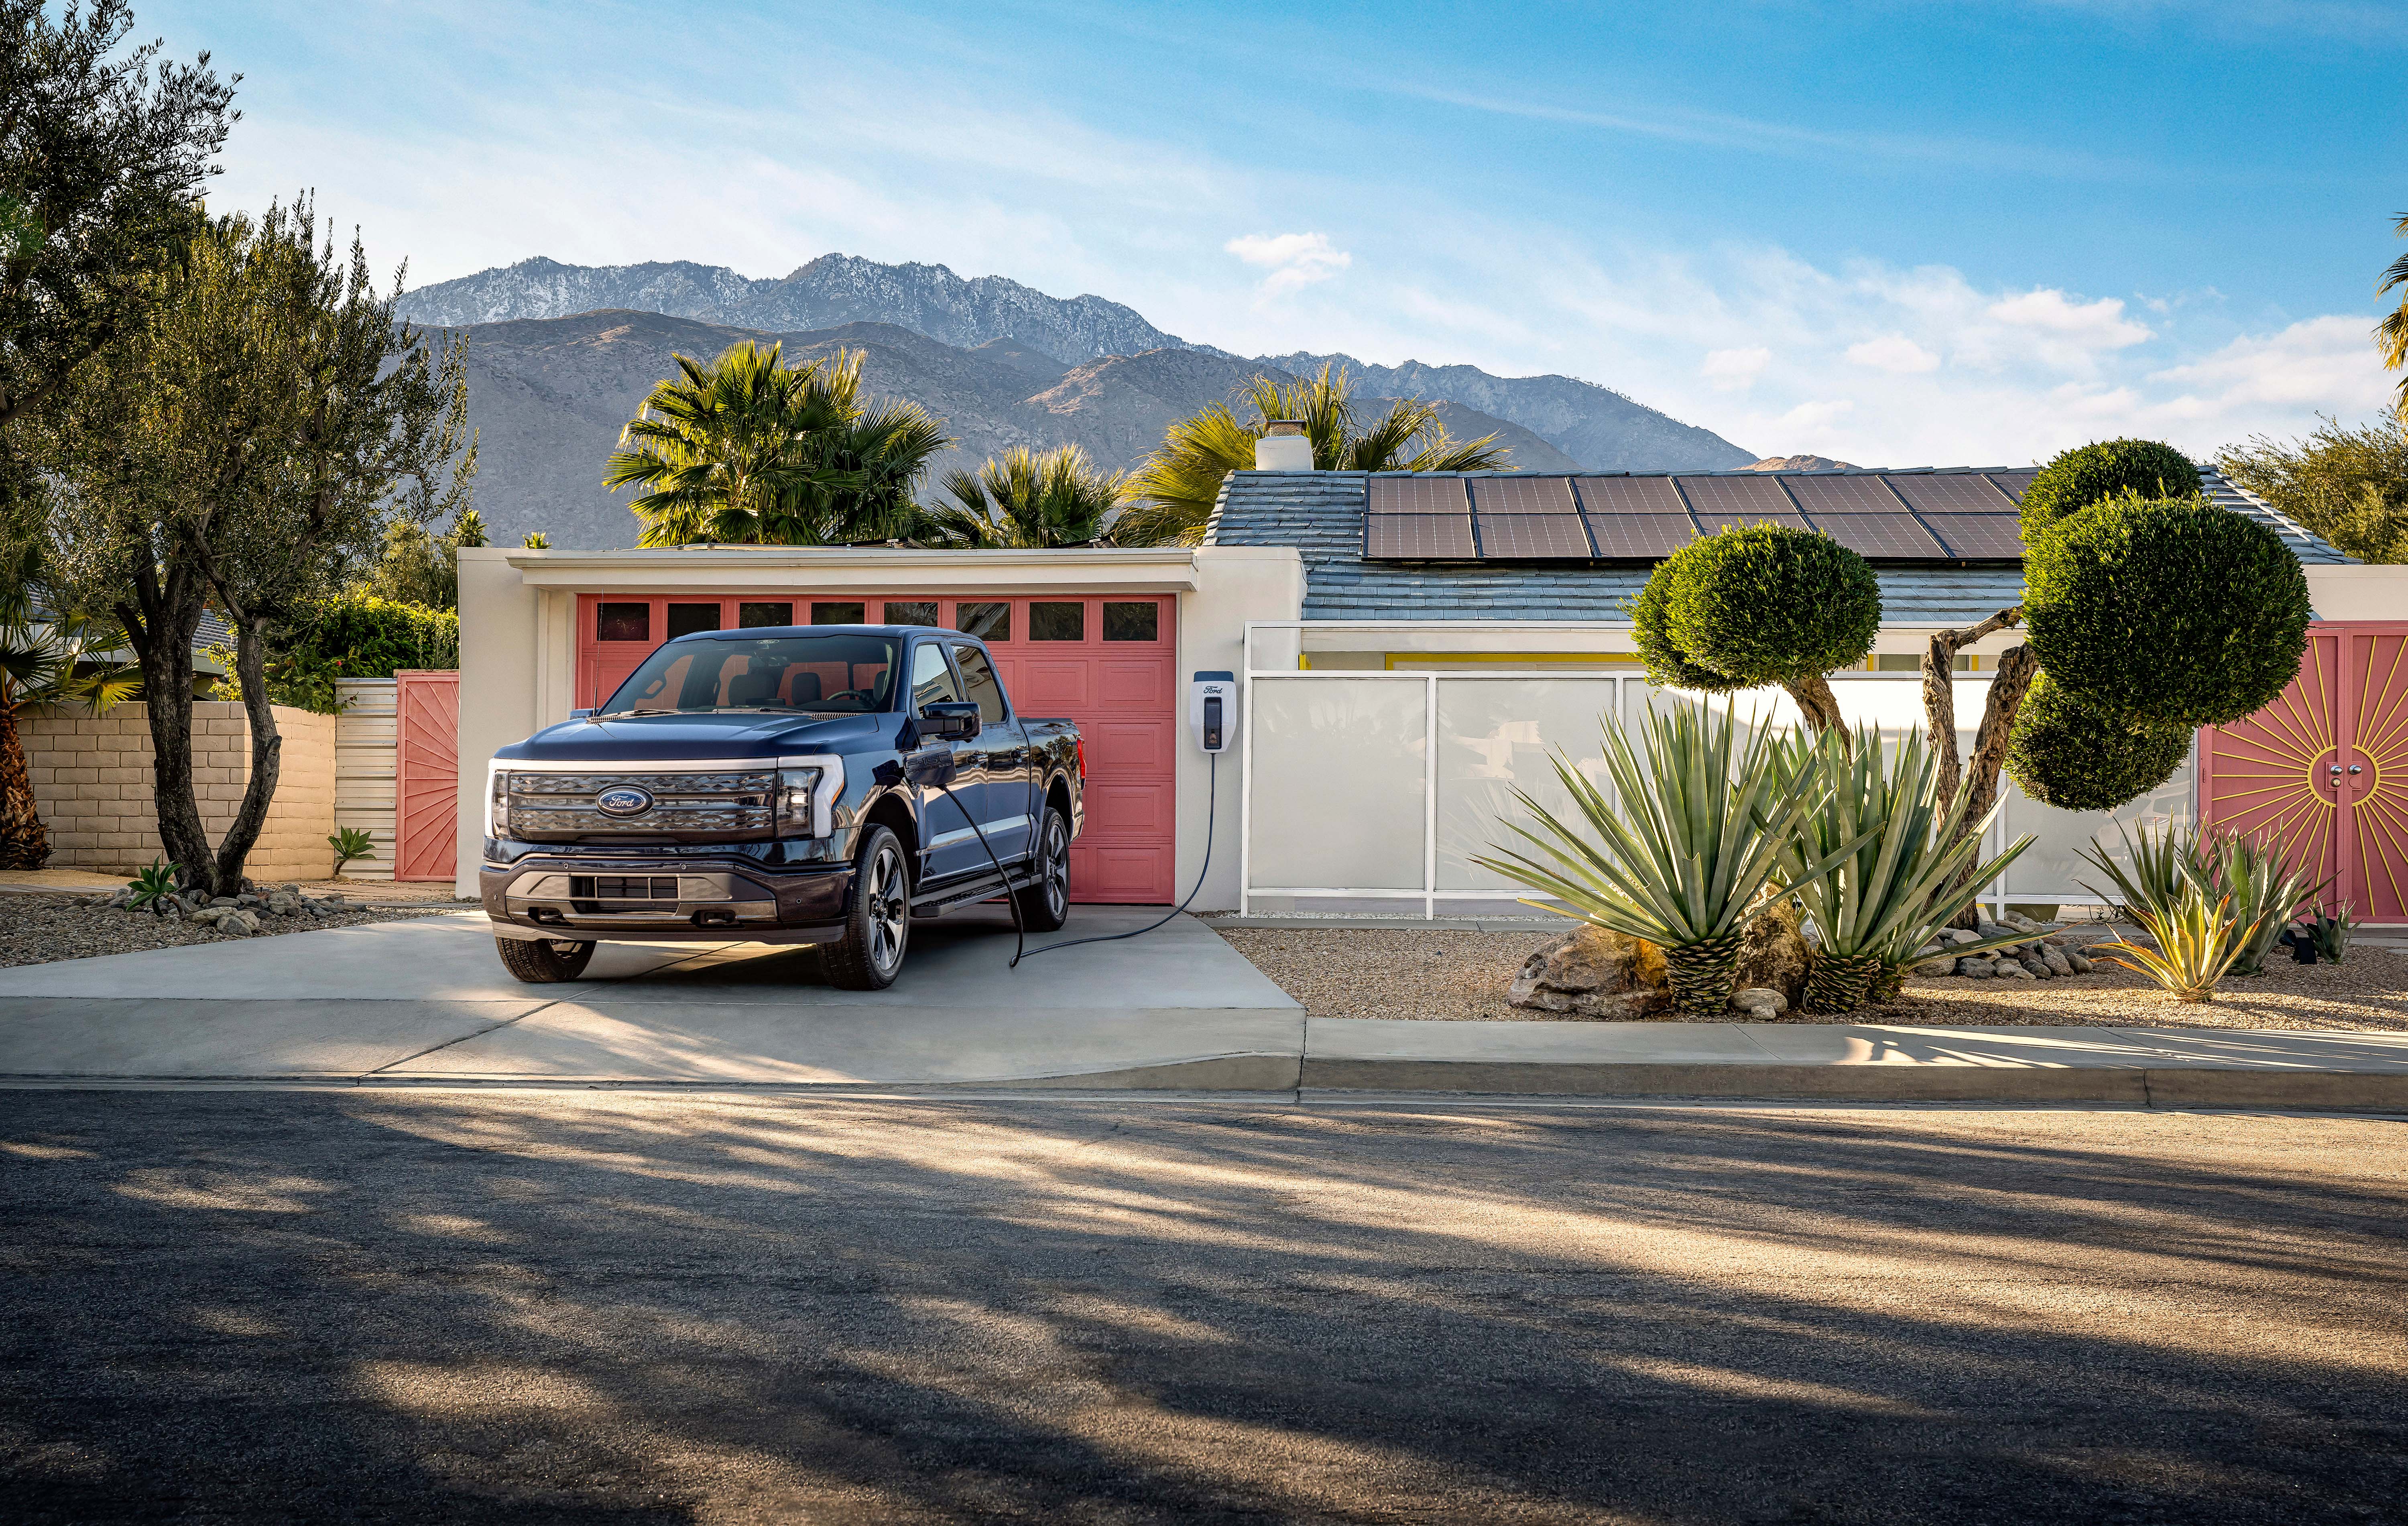 Ford F-150 Lightning Can Power Your Home in an Emergency